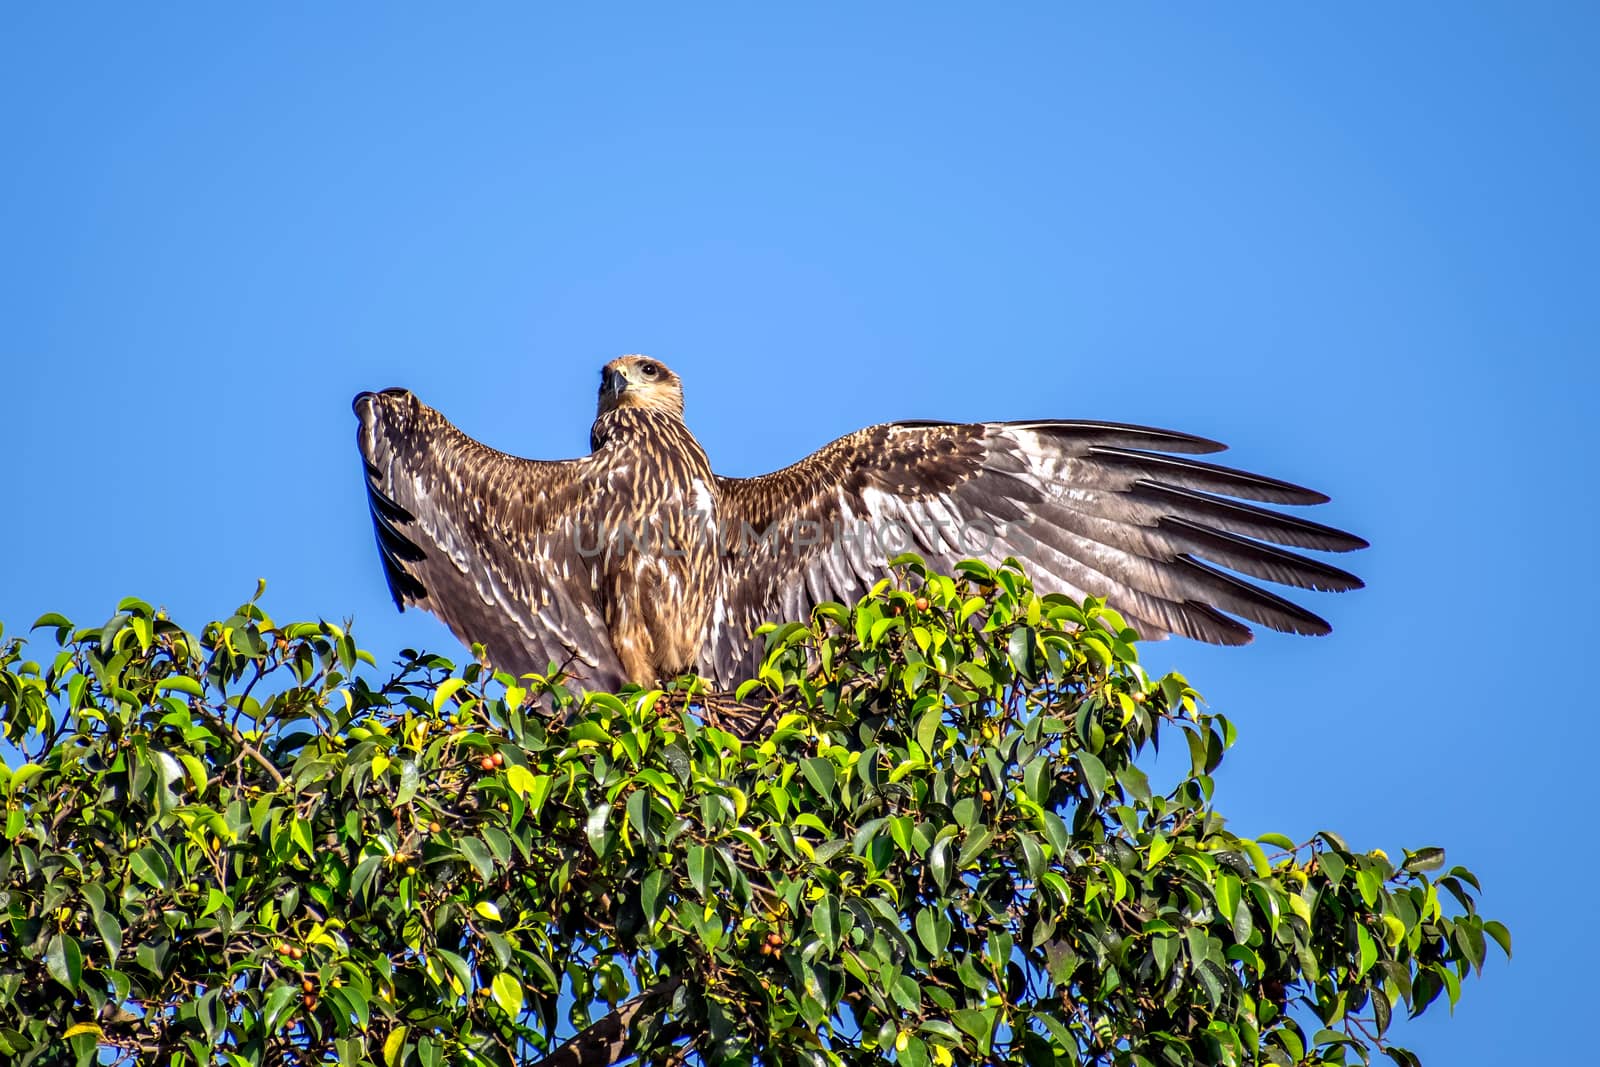 Black kite bird spreading large wings & sitting on top of tree.The black kite (Milvus migrans) is a medium-sized bird of prey in the family Accipitridae, which also includes many other diurnal raptors.